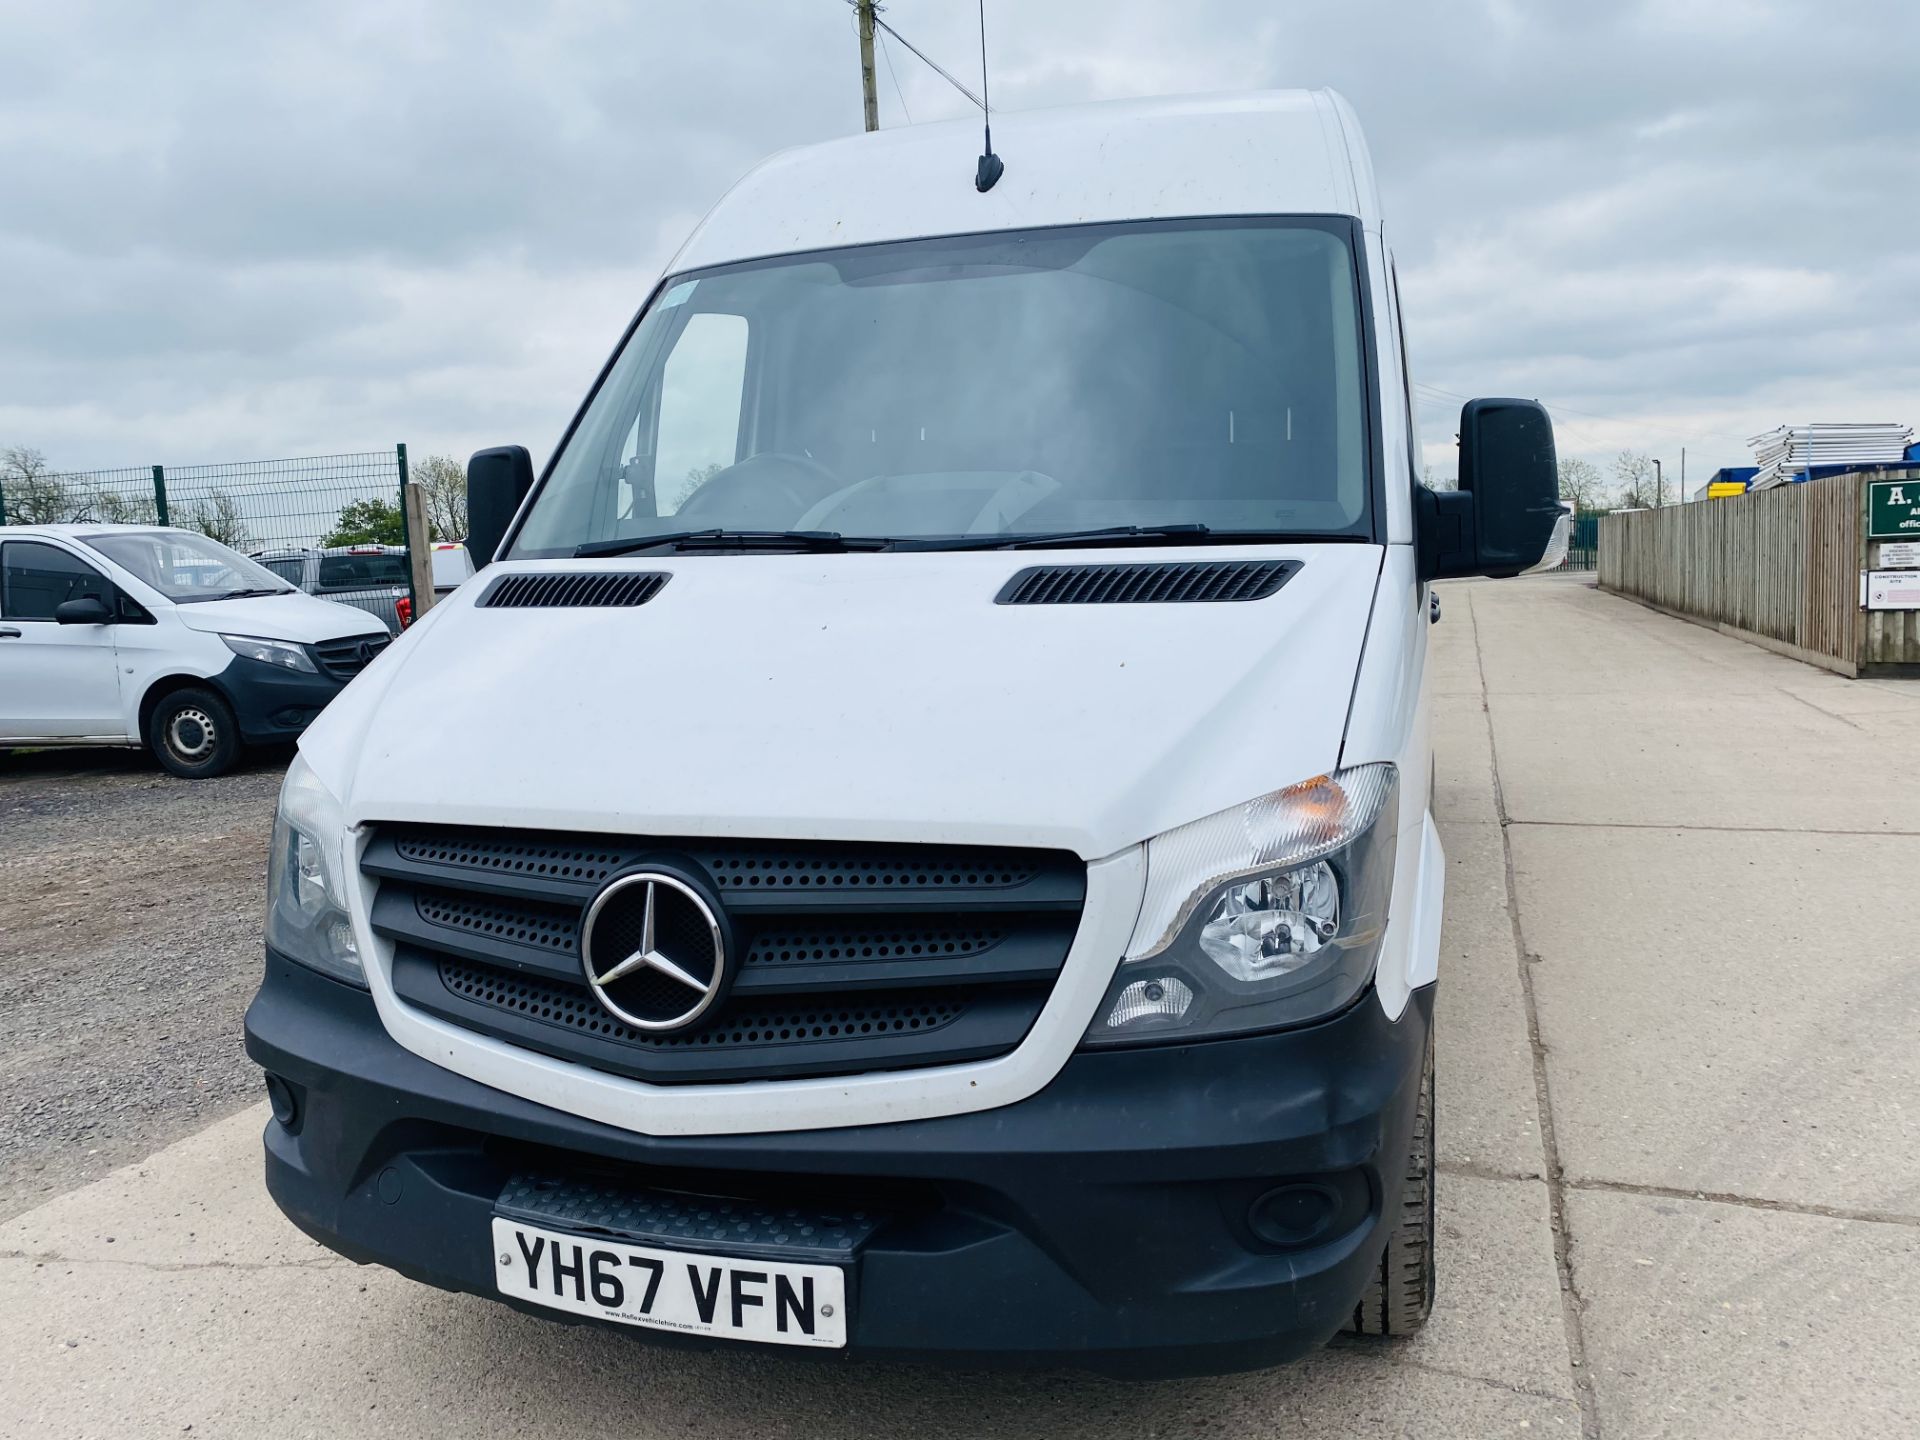 MERCEDES SPRINTER 314CDI "LWB" HIGH ROOF WITH FULL ELECTRIC TAIL-LIFT - 2018 MODEL - 1 OWNER - FSH - Image 5 of 18